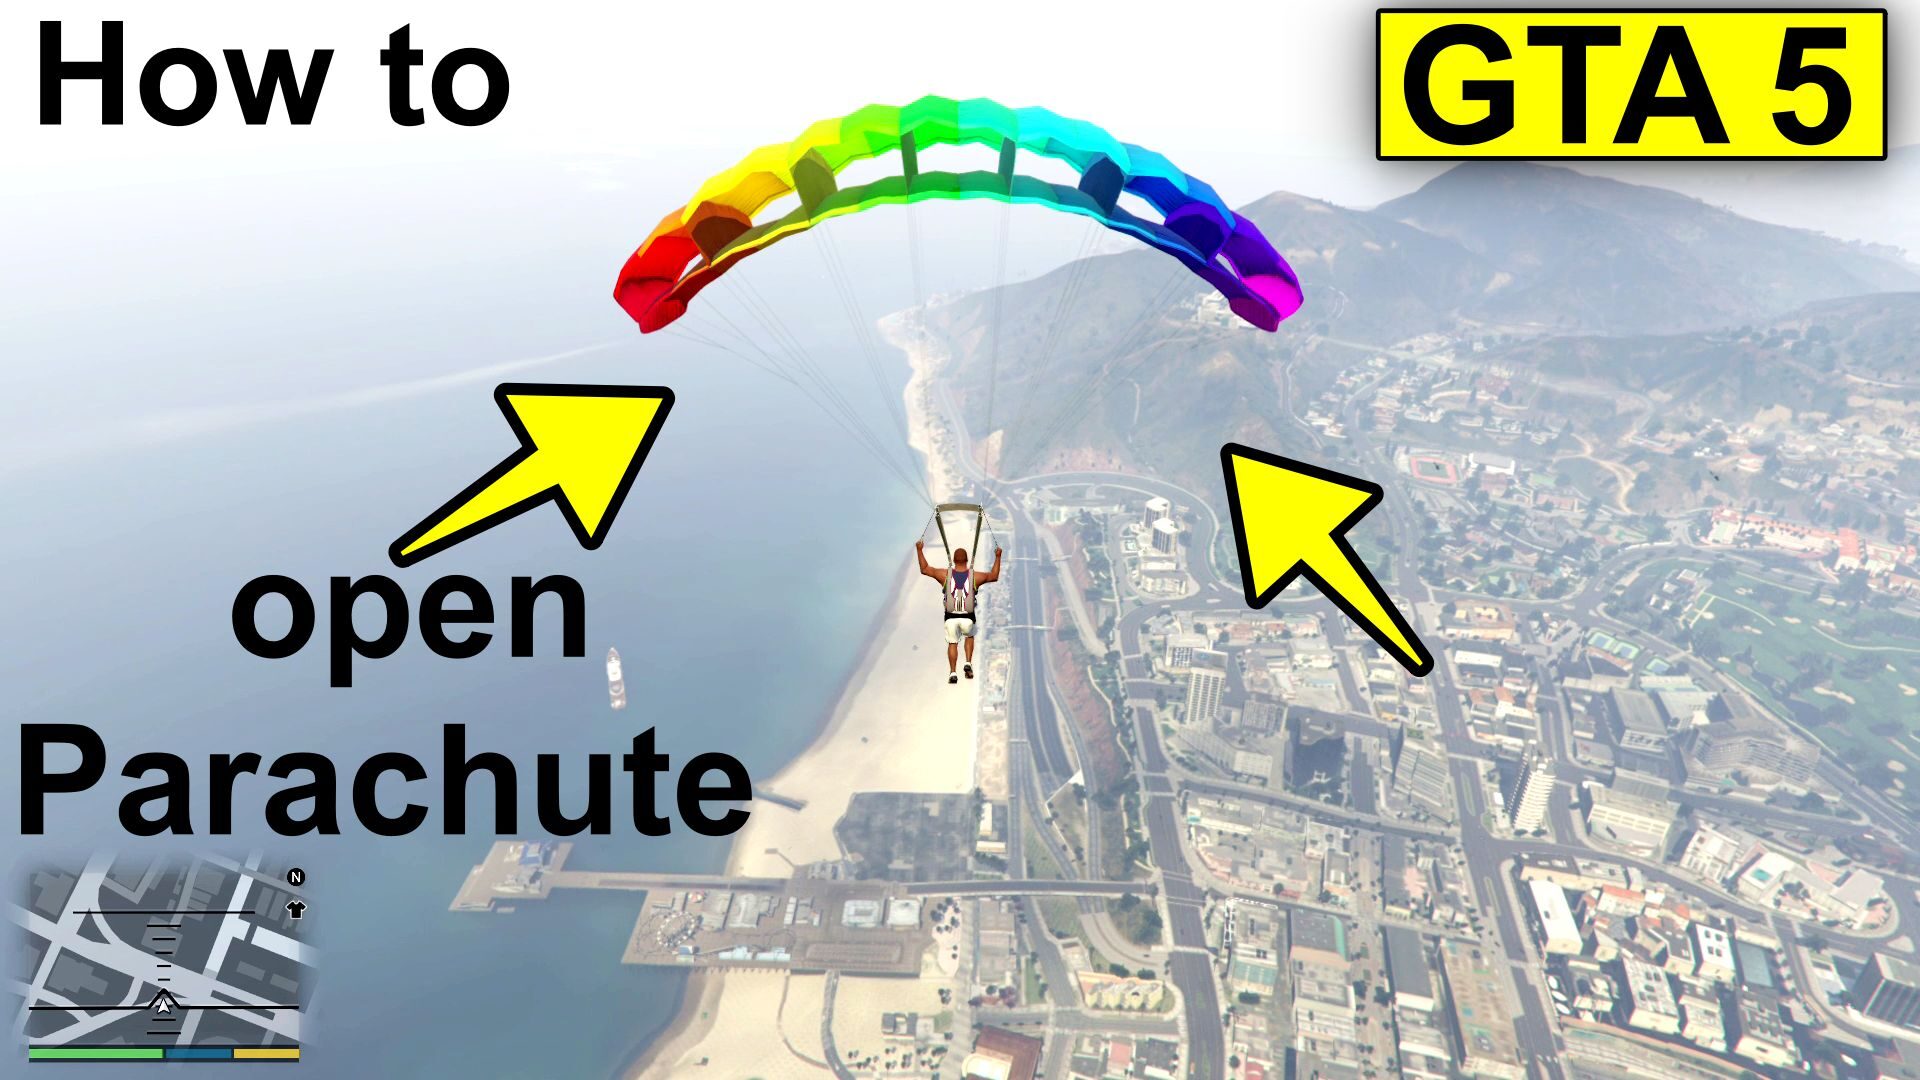 How to open Parachute in GTA 5 - by Which Button